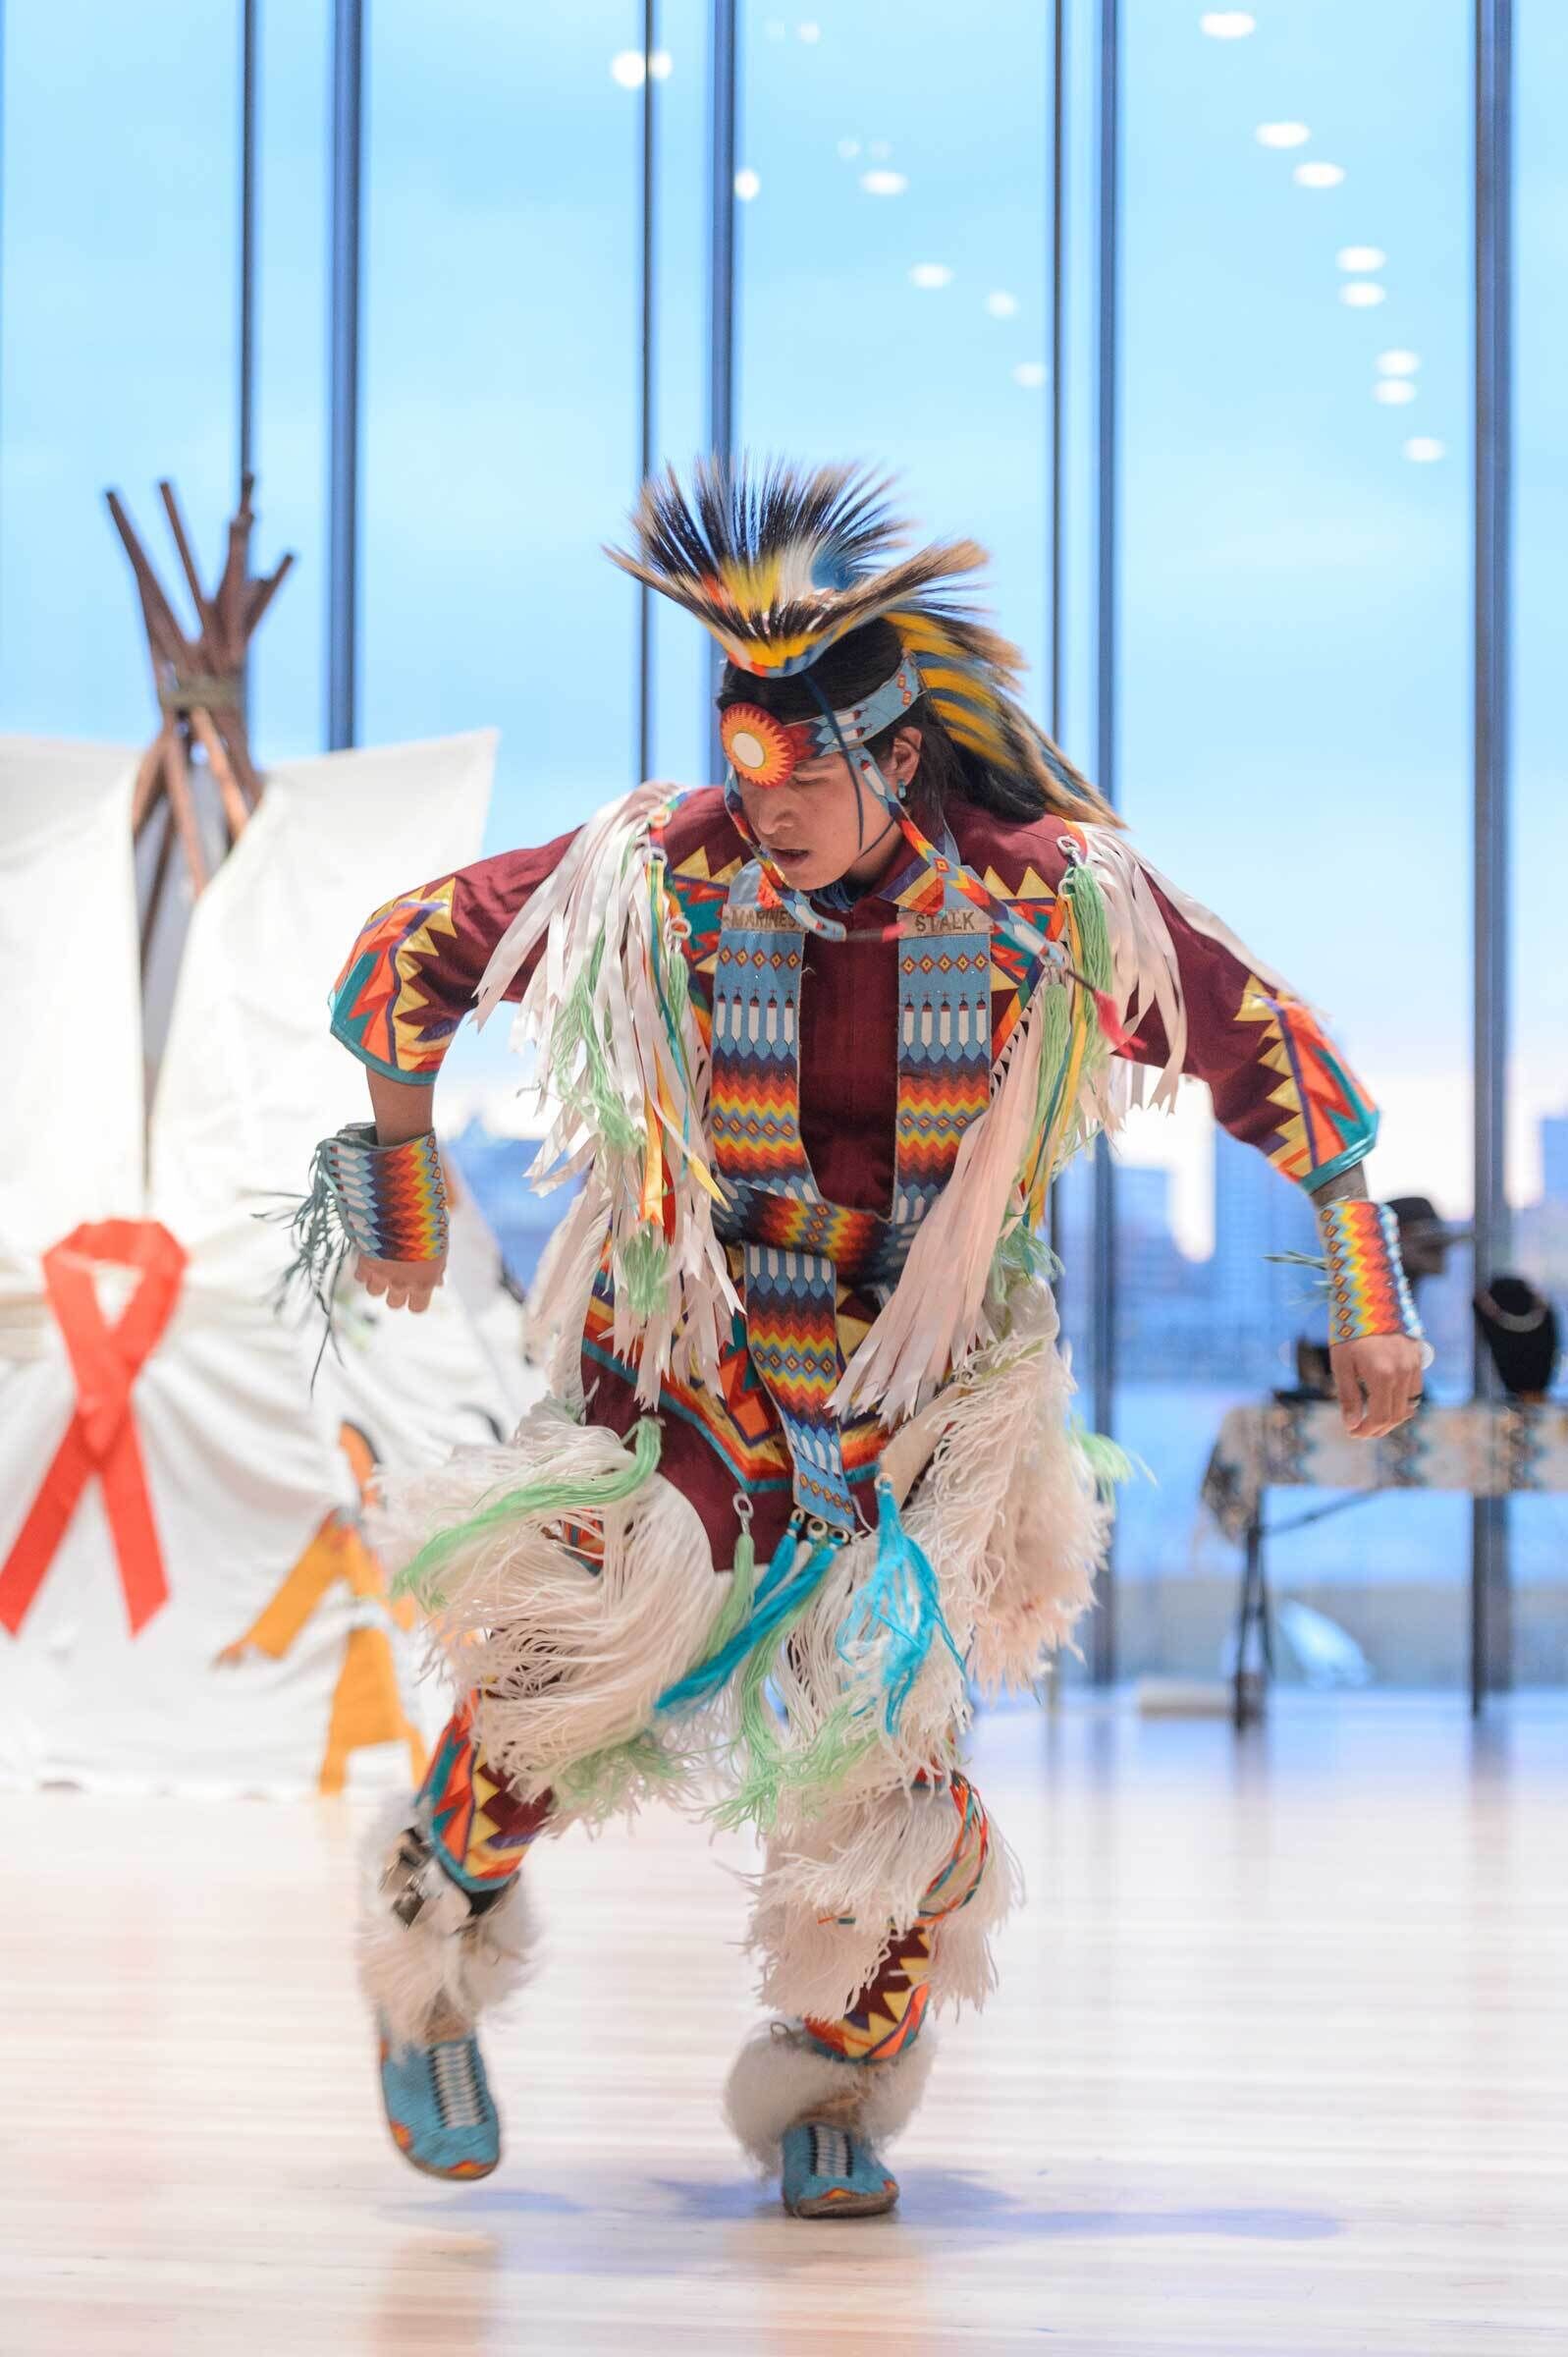 Indigenous dancer in traditional regalia performing at an indoor event, with a tipi in the background.